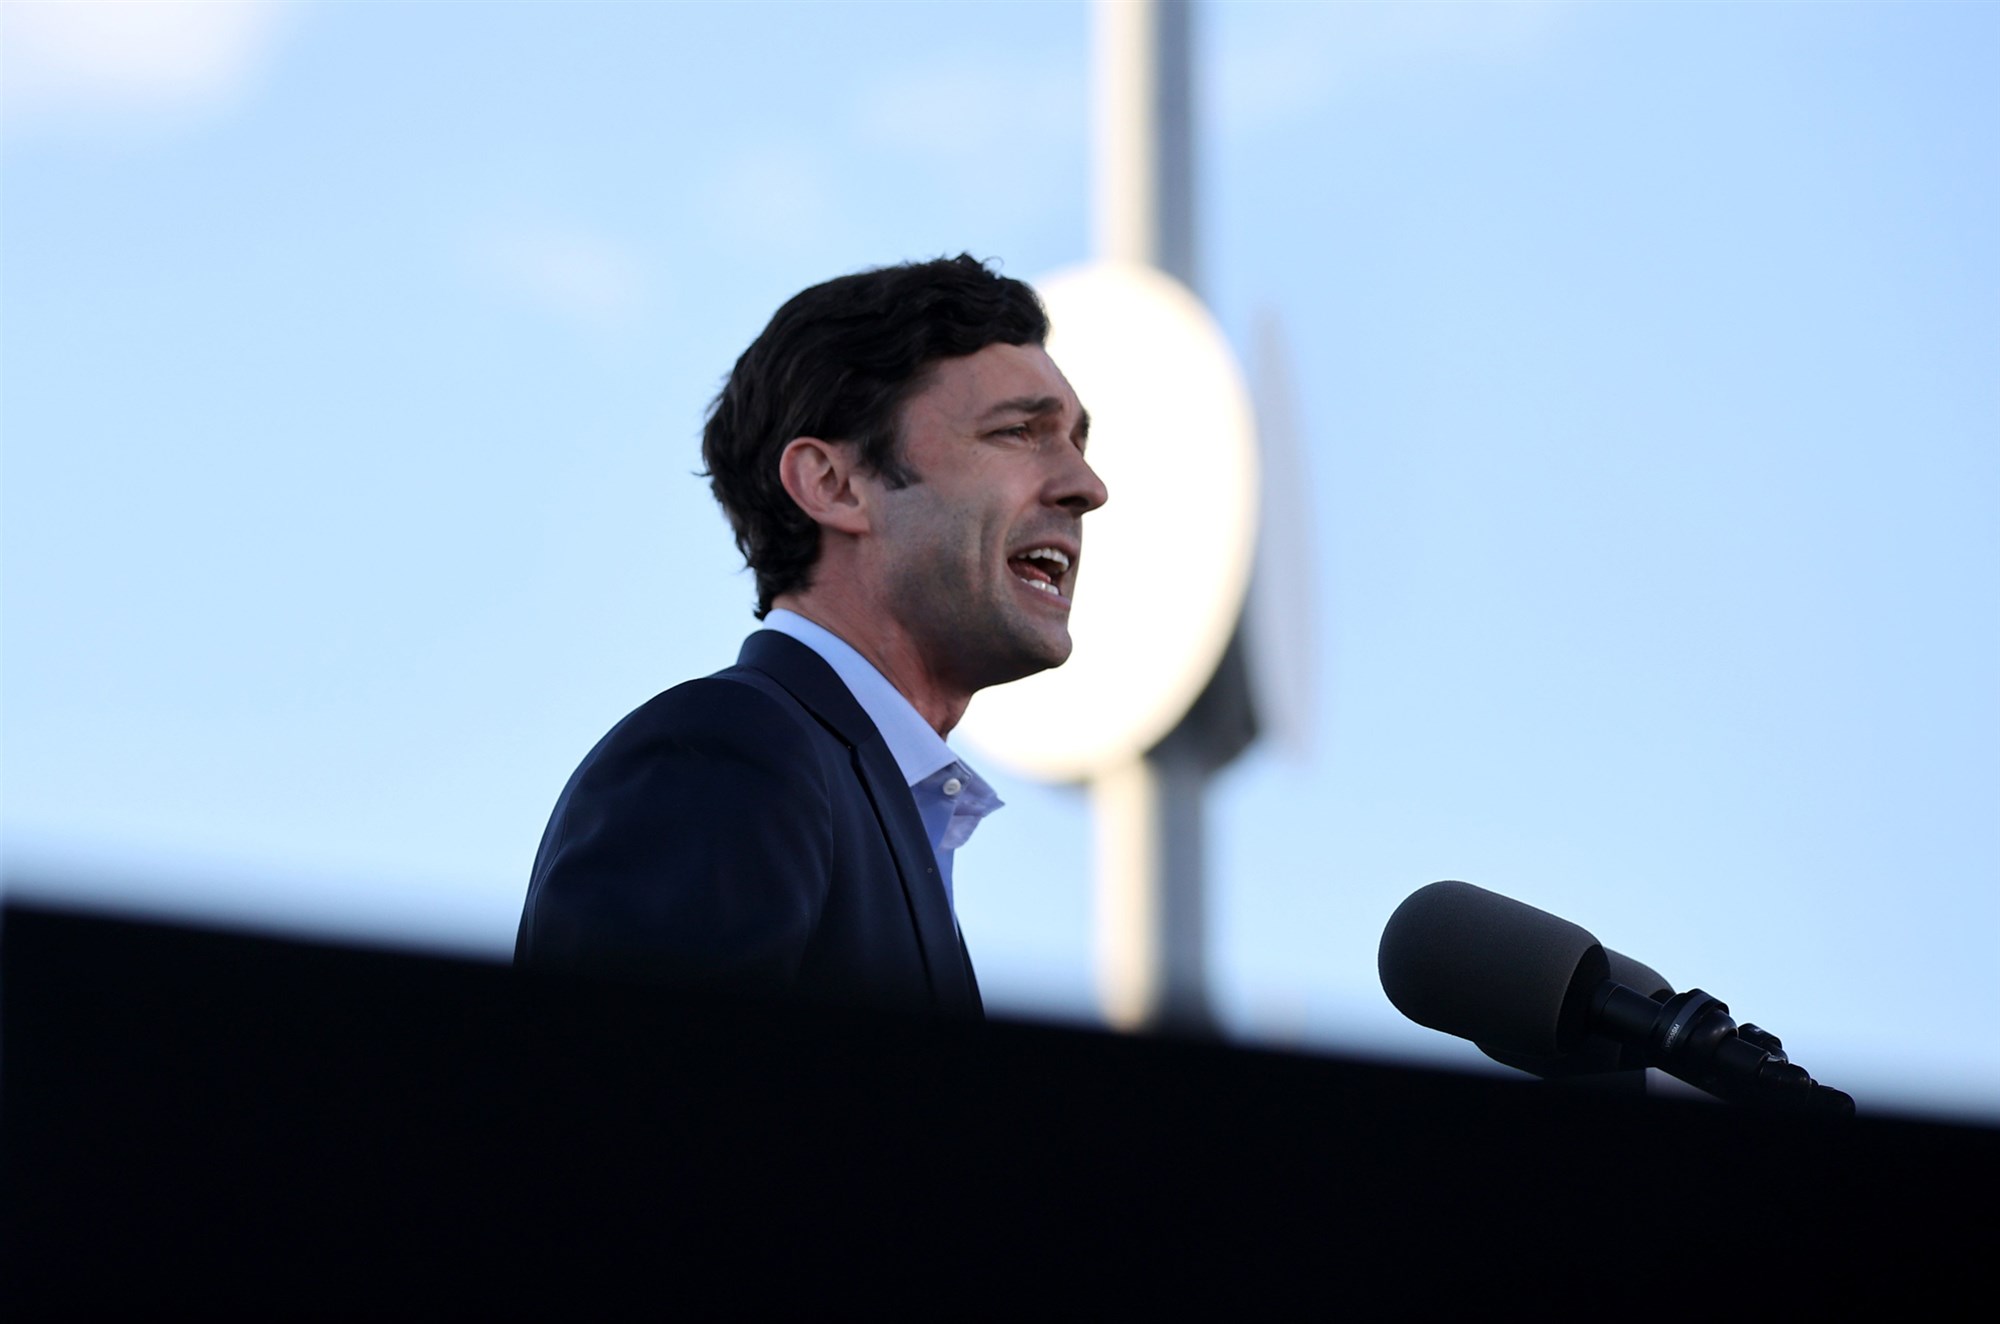 In Georgia, Democrats close with populist pitch vowing $2,000 stimulus checks